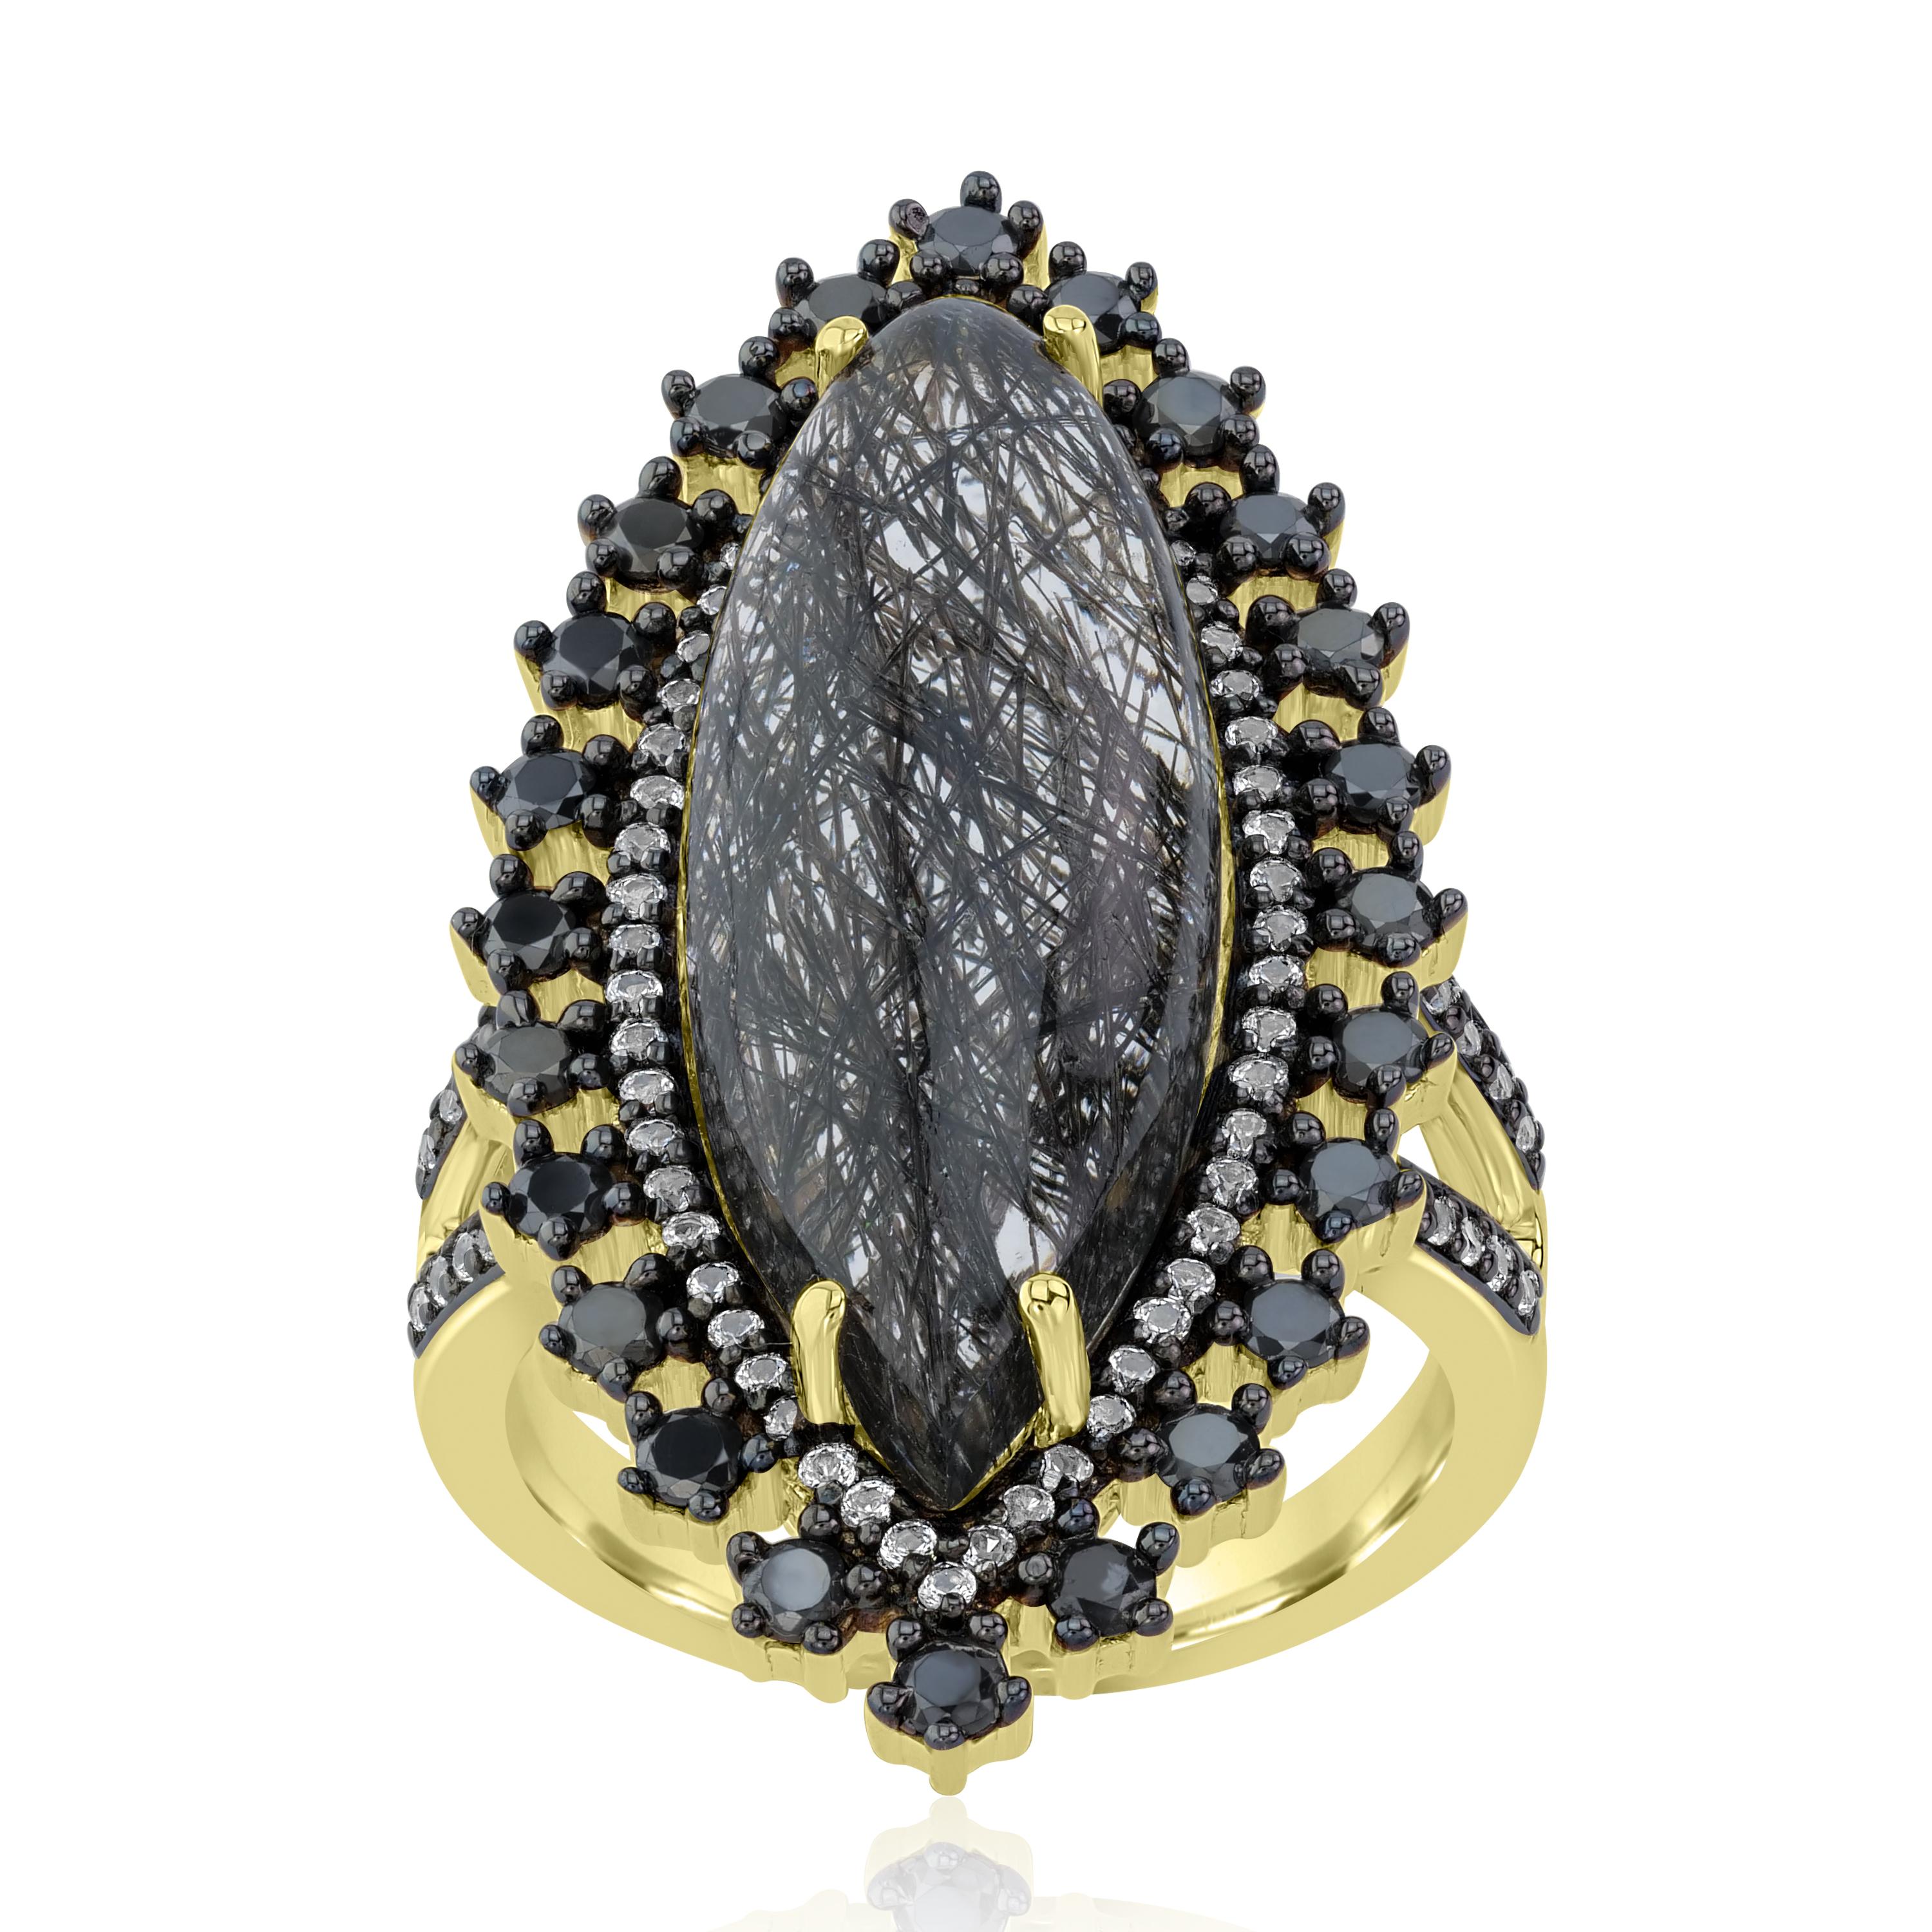 Complete your look with this bold women's ring. A 12.82Ct tw marquise shaped black rutile is framed within white topaz and black spinal in individual prongs of genuine and nickel free sterling silver. This ring comes with a 14 Karat yellow gold